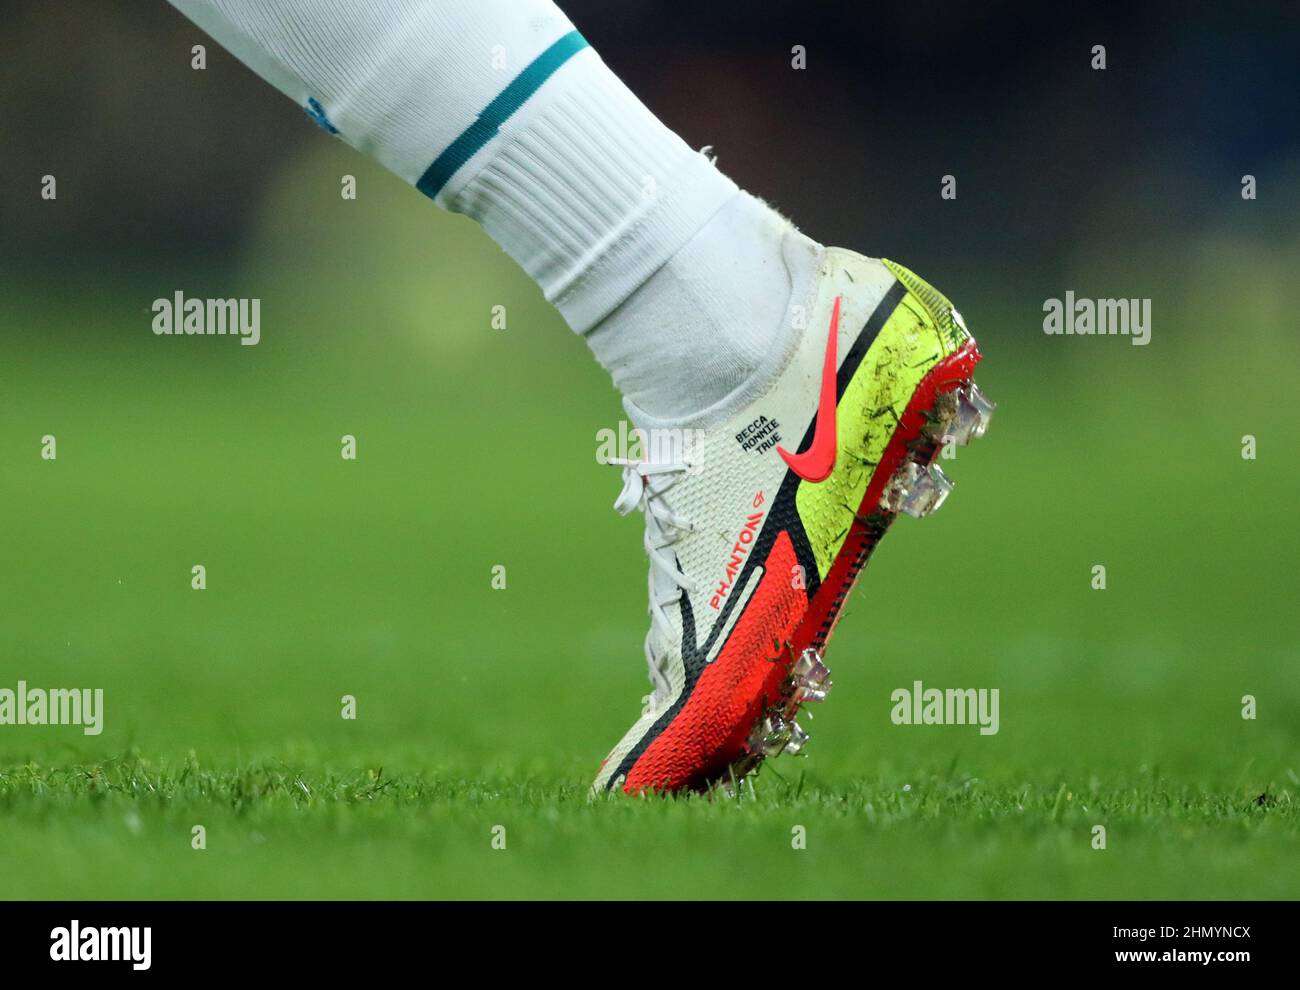 Nike Football Boots High Resolution Stock Photography and Images - Alamy